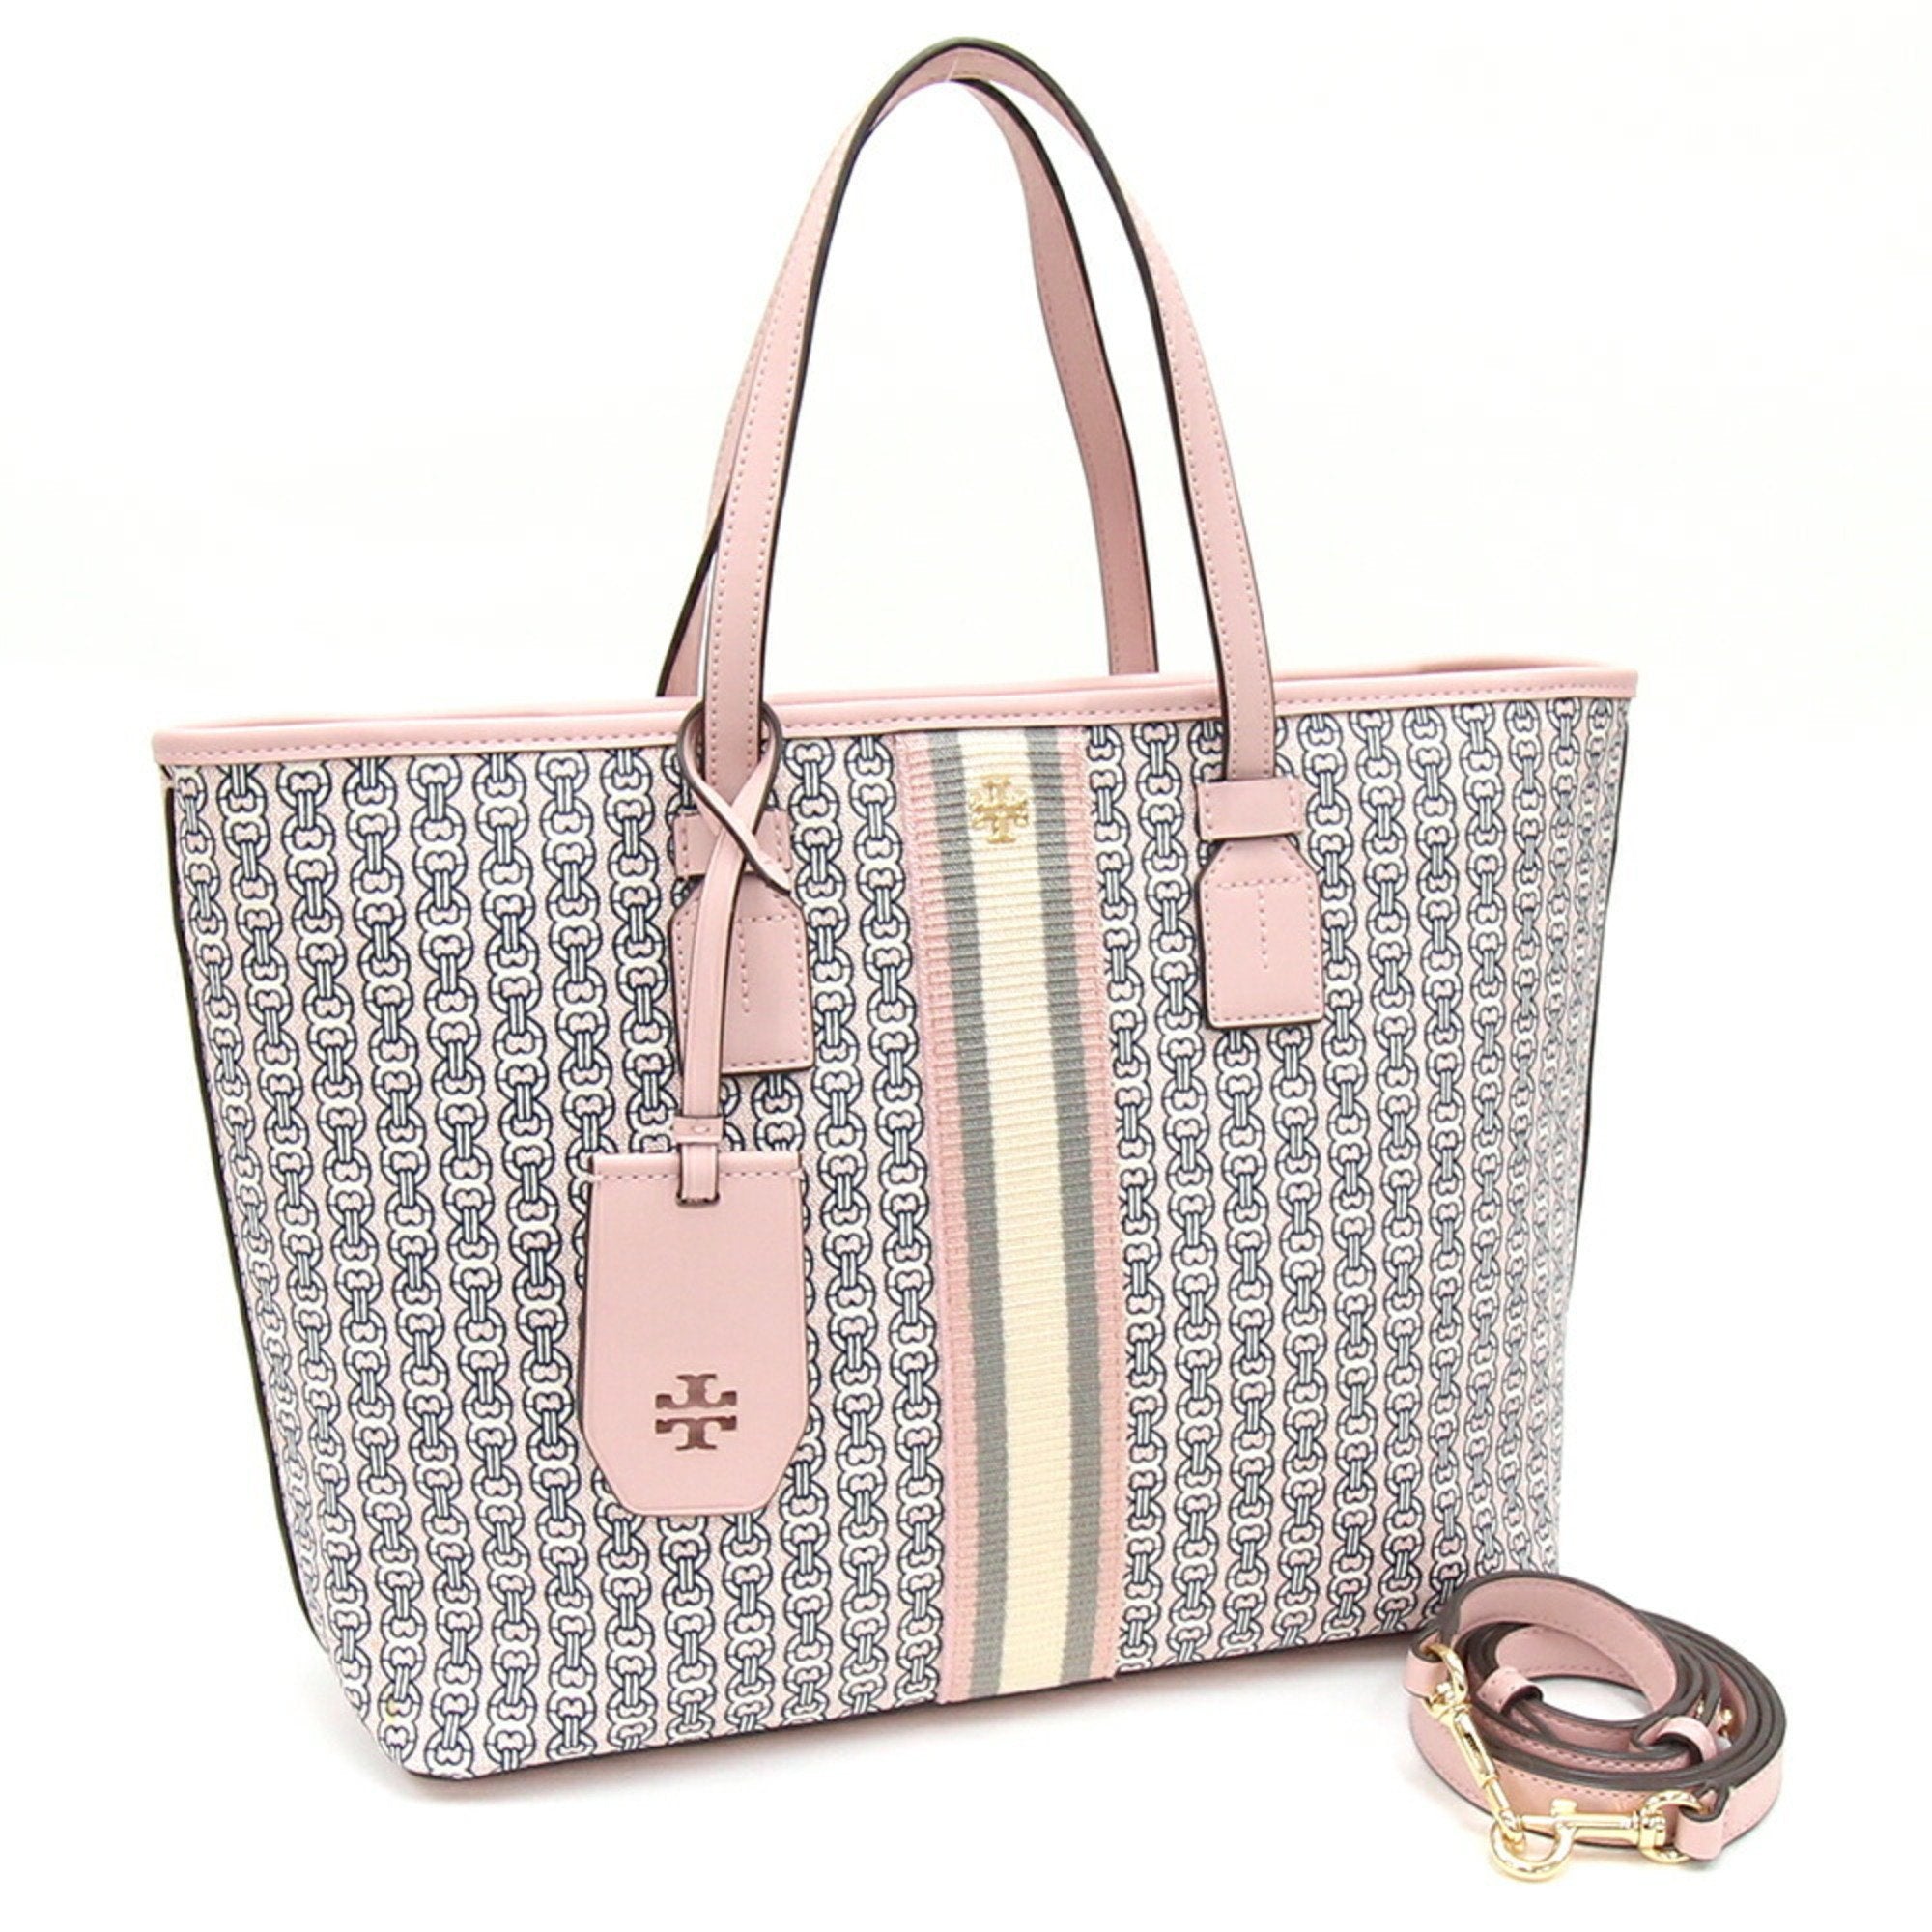 Matelassé Leather Shoulder Bag With Frontal Logo by Tory Burch in Pink  color for Luxury Clothing | THE LIST